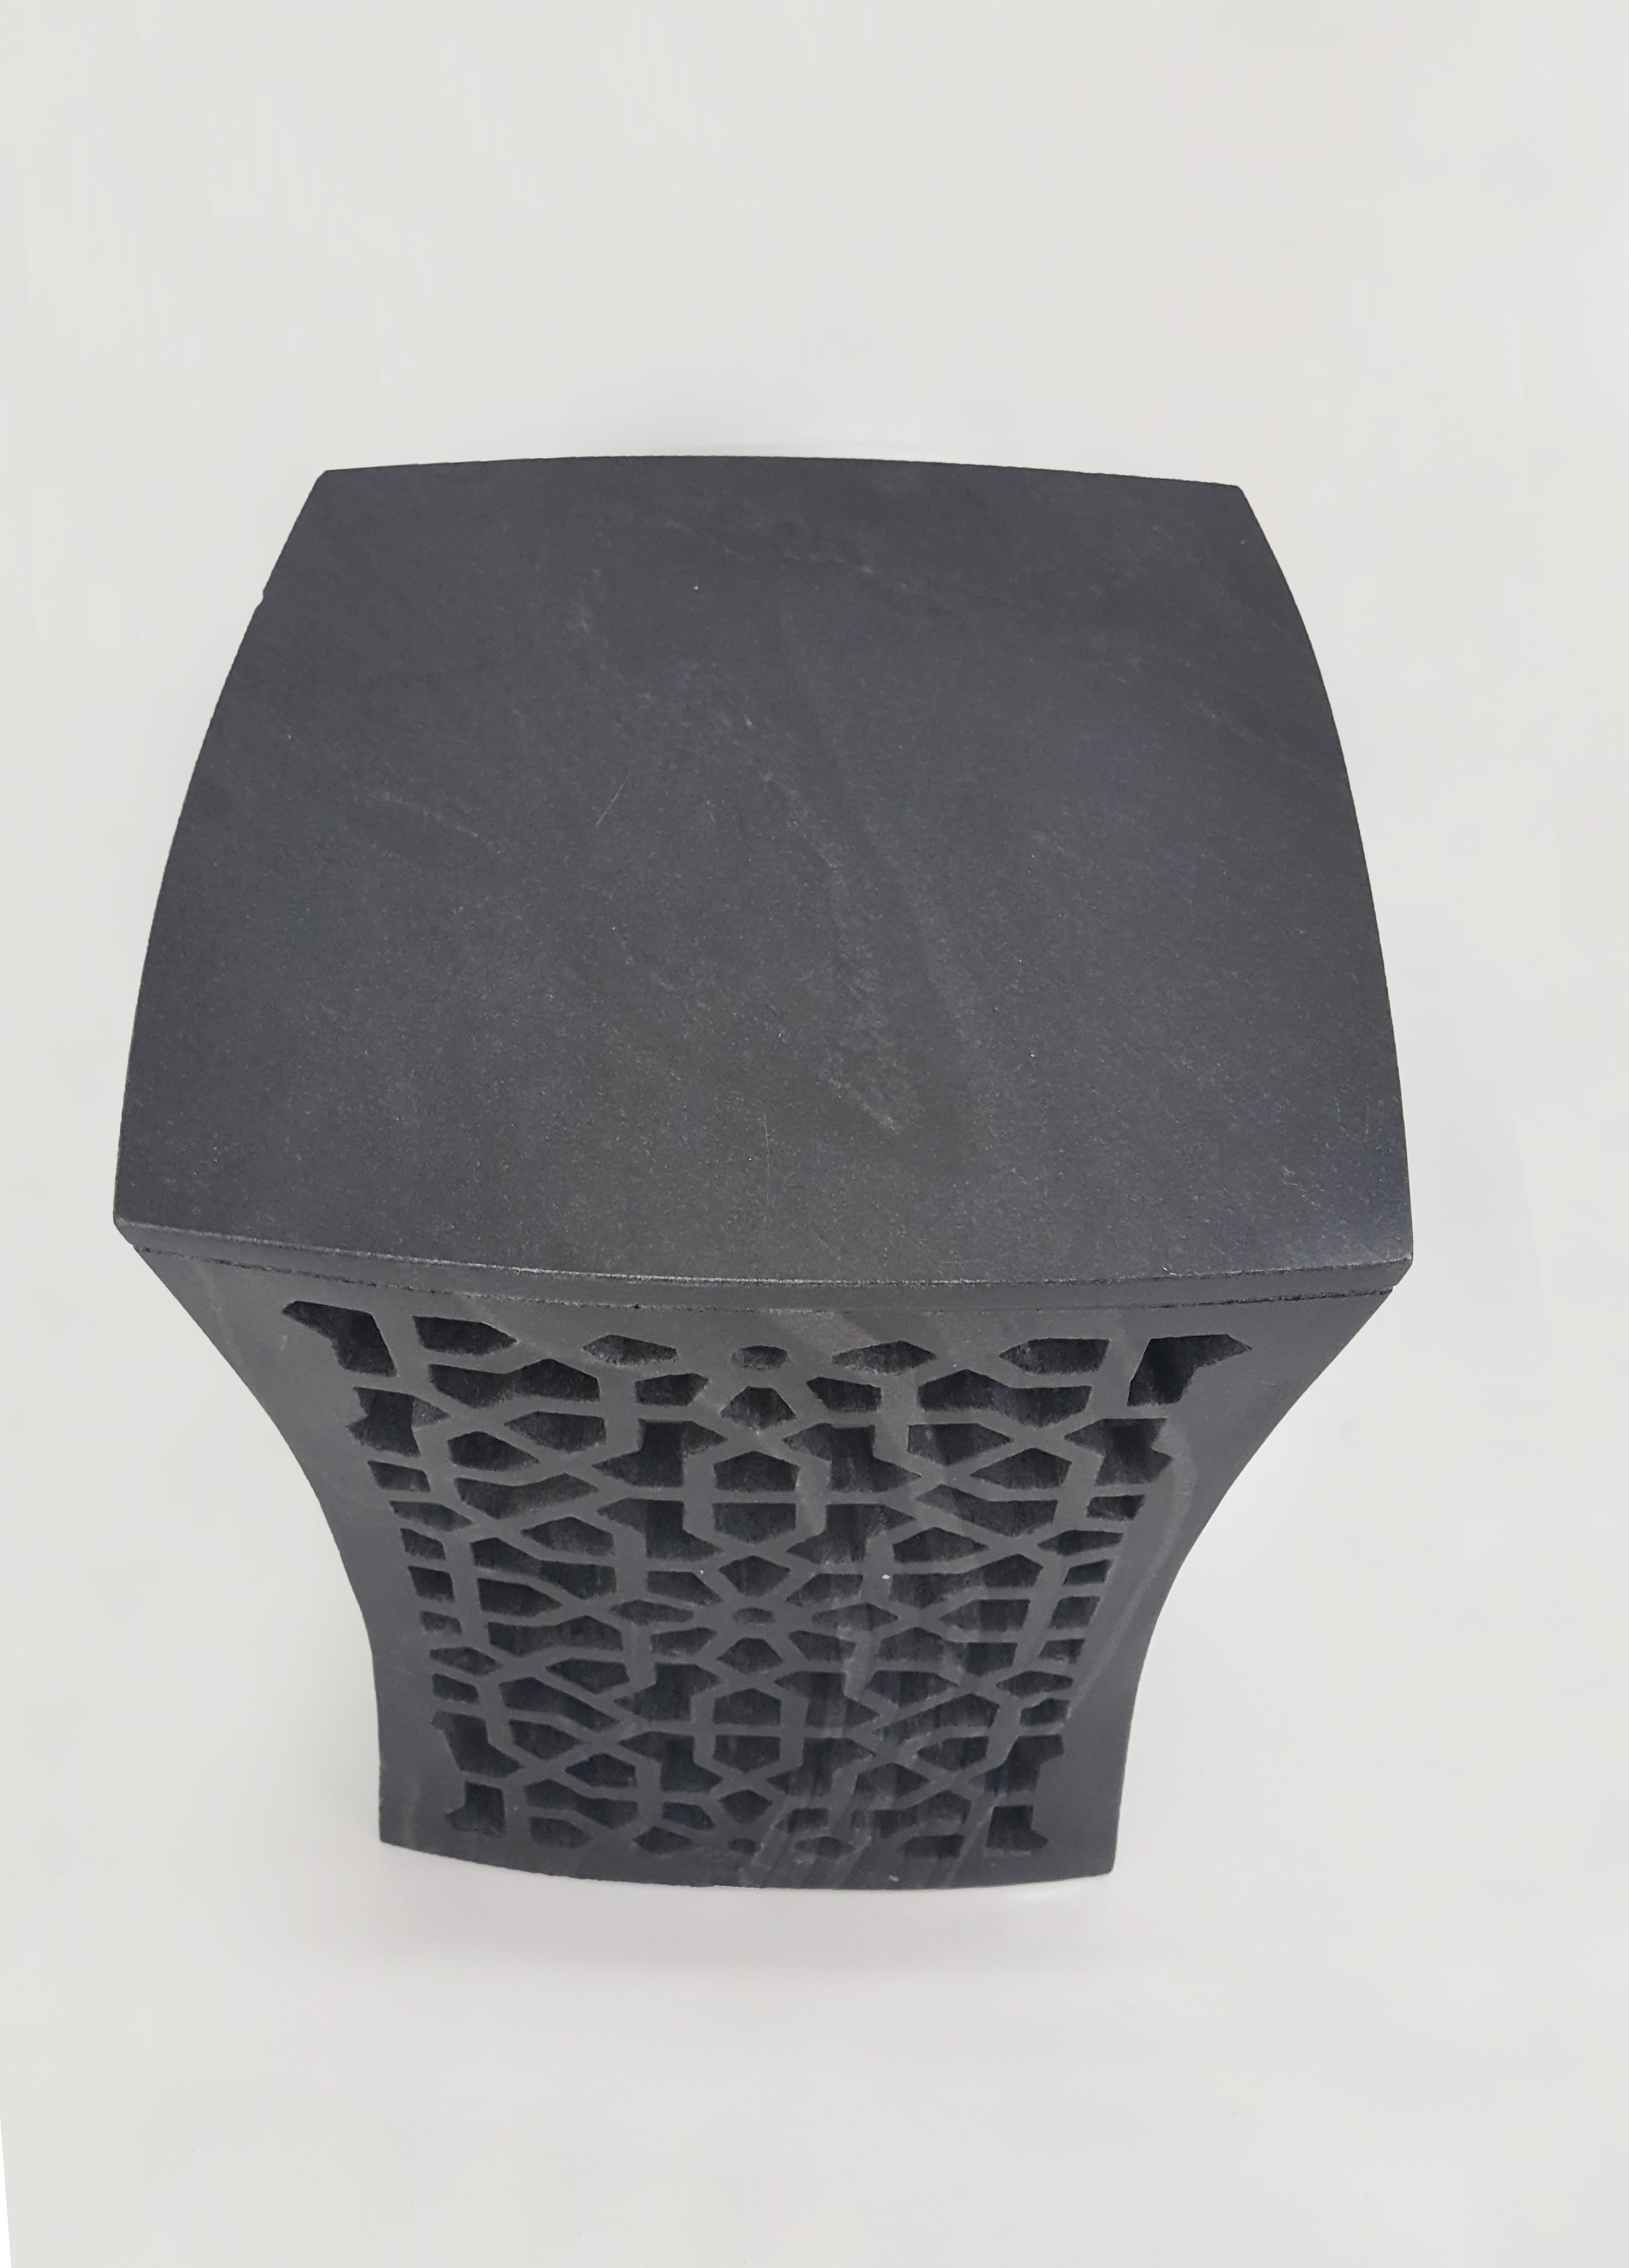 Set of Two Jour Geometric Jali Side Tables in Black Marble by Paul Mathieu For Sale 2